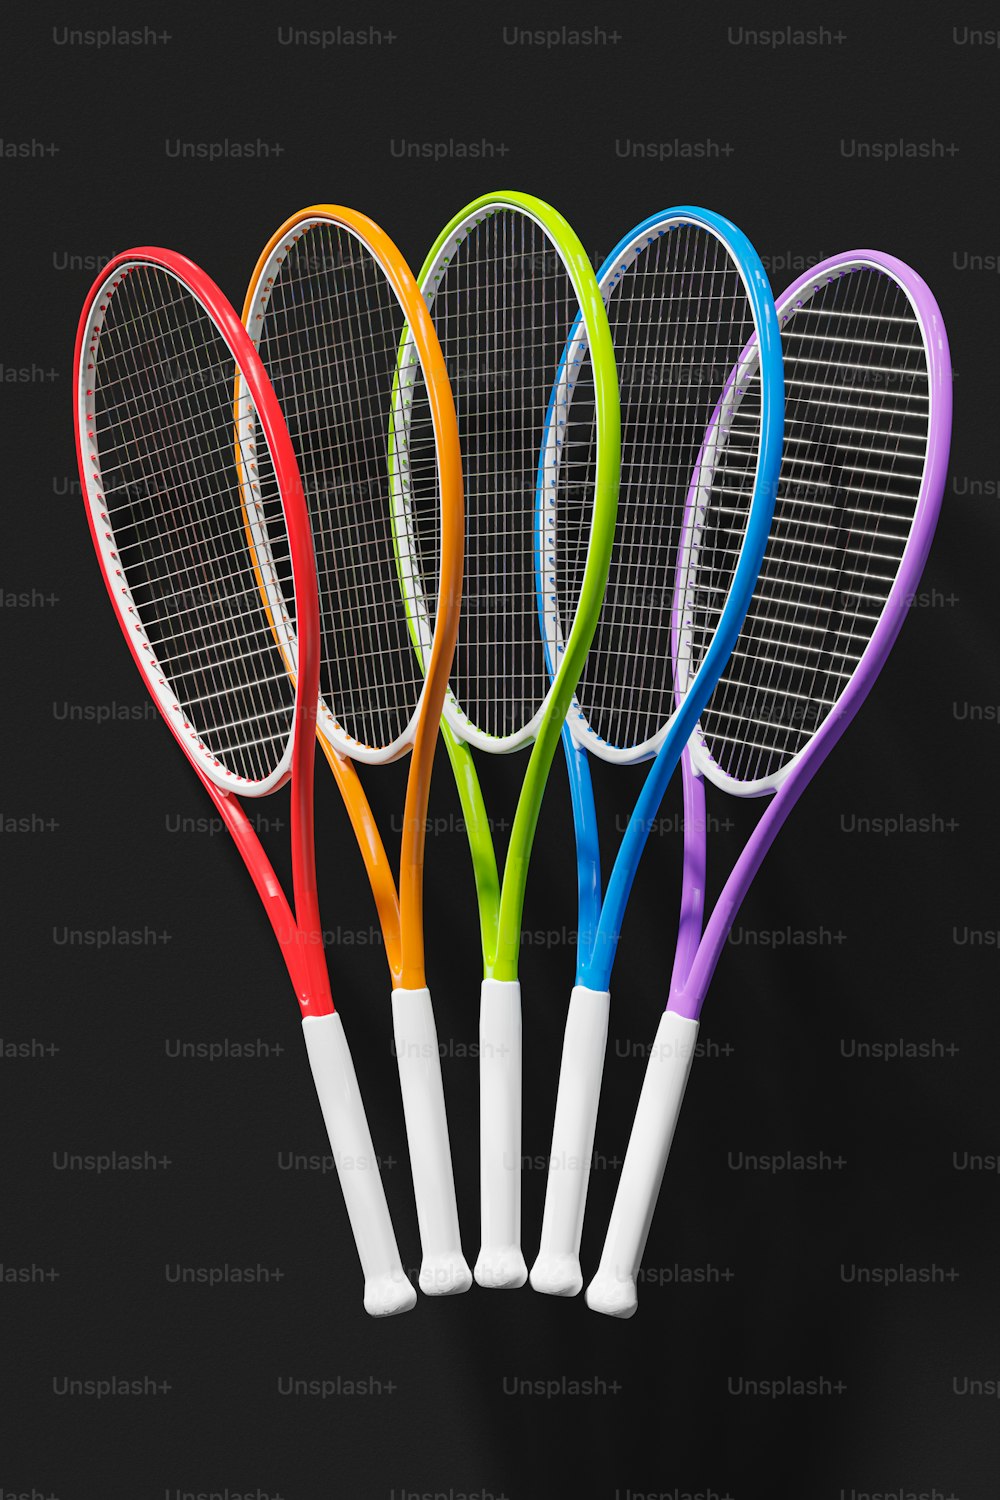 a group of four tennis racquets sitting next to each other